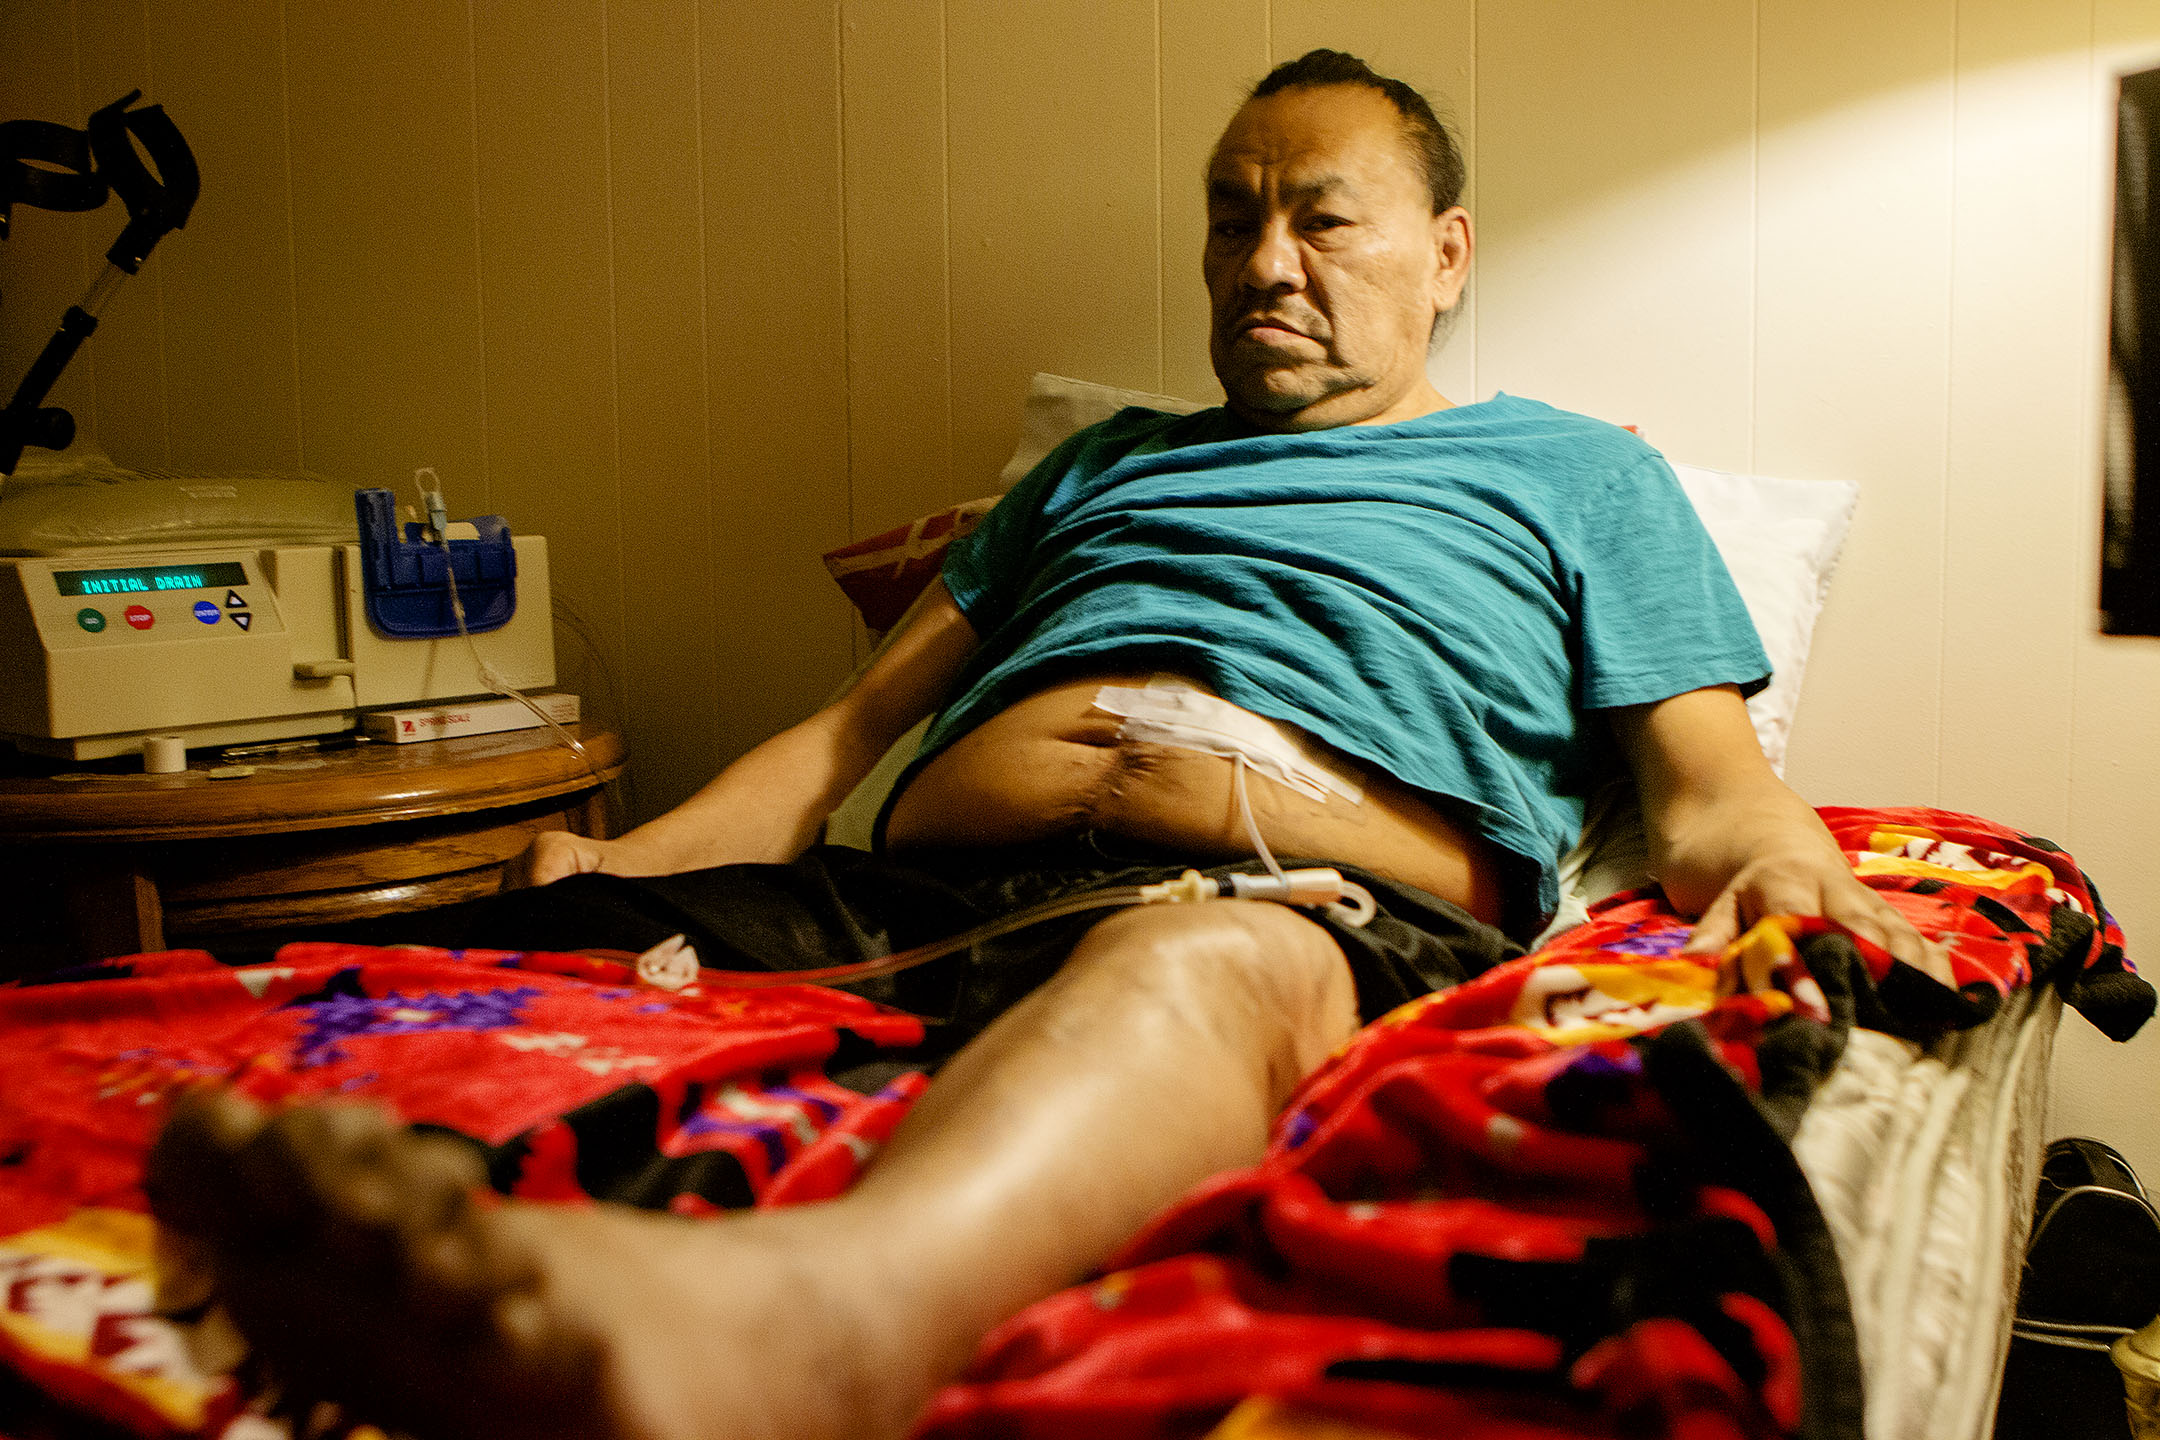 Jay Red Woman is a home dialysis patient living in Ashland, just outside of the Northern Cheyenne reservation. He says home dialysis is liberating for him because he is able to dialyze while he sleeps.